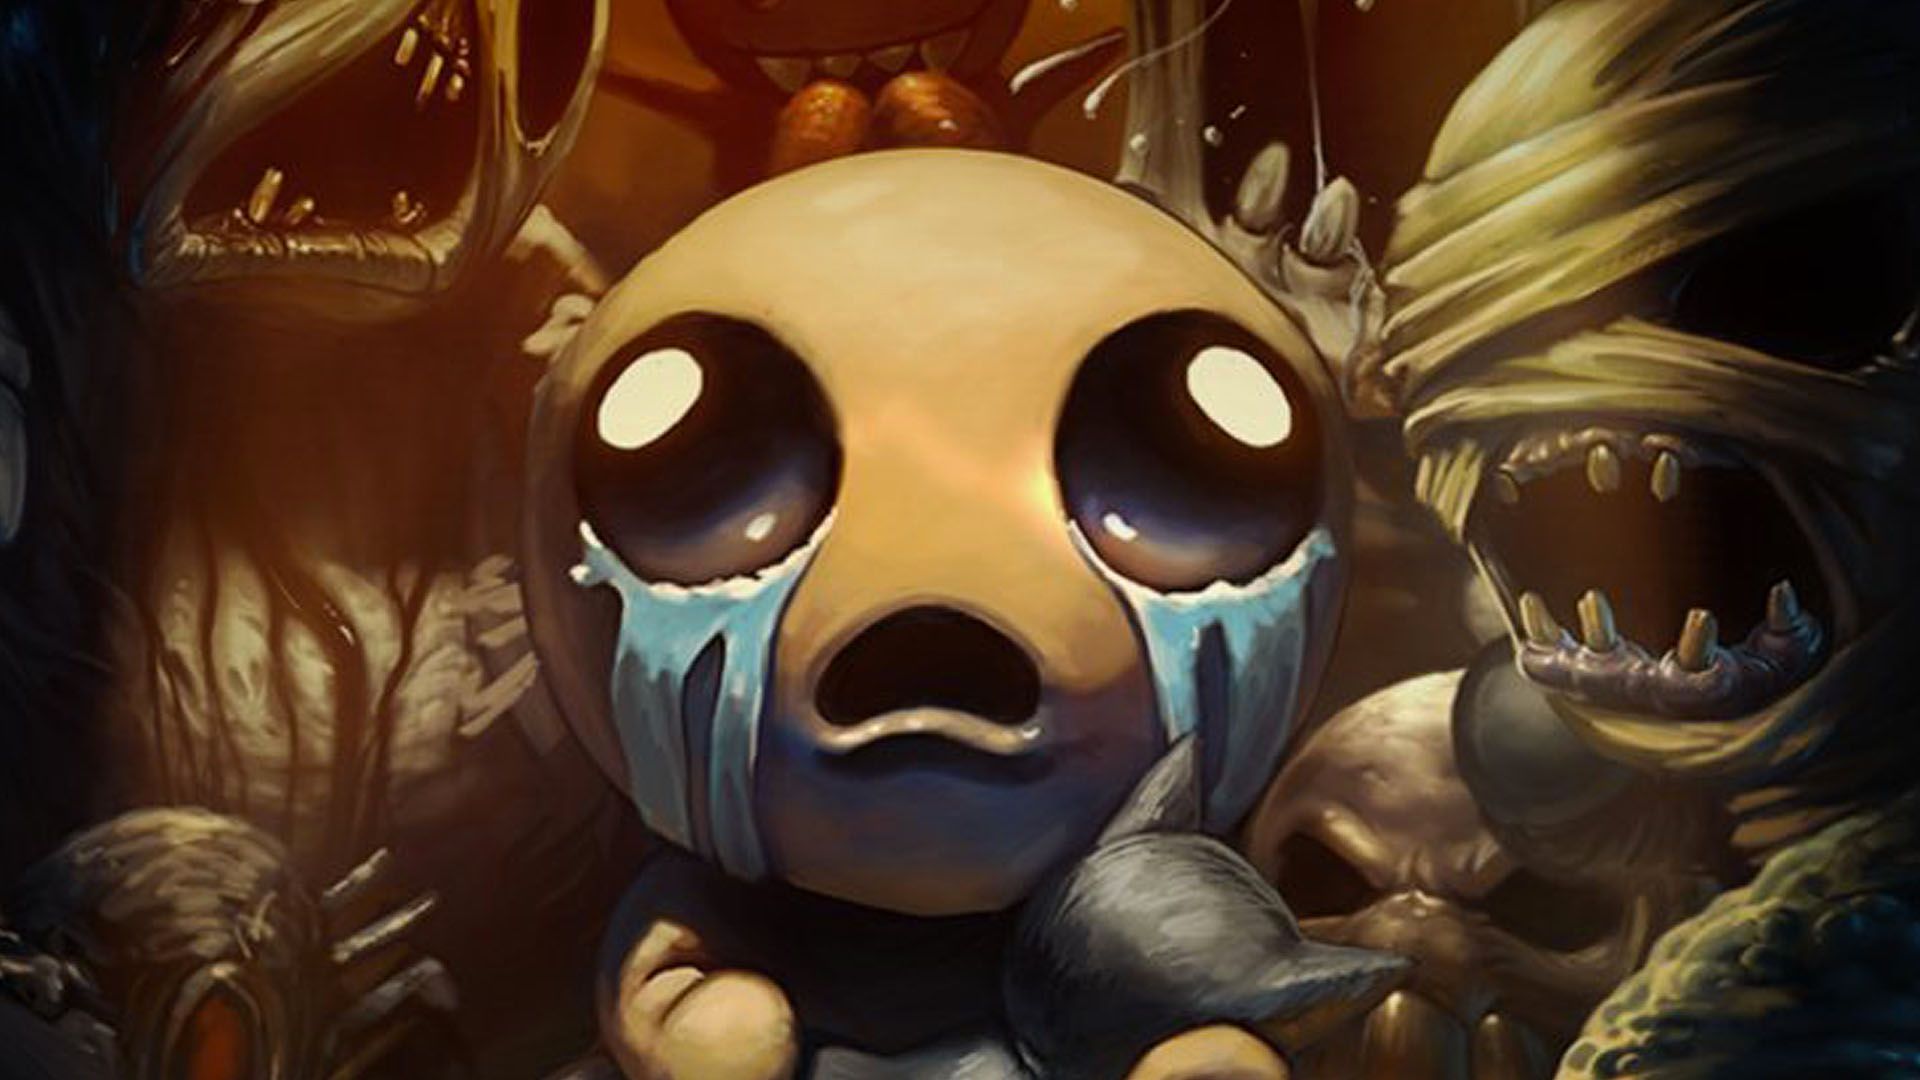 The Binding Of Isaac: Afterbirth+ Coming To Nintendo Switch March